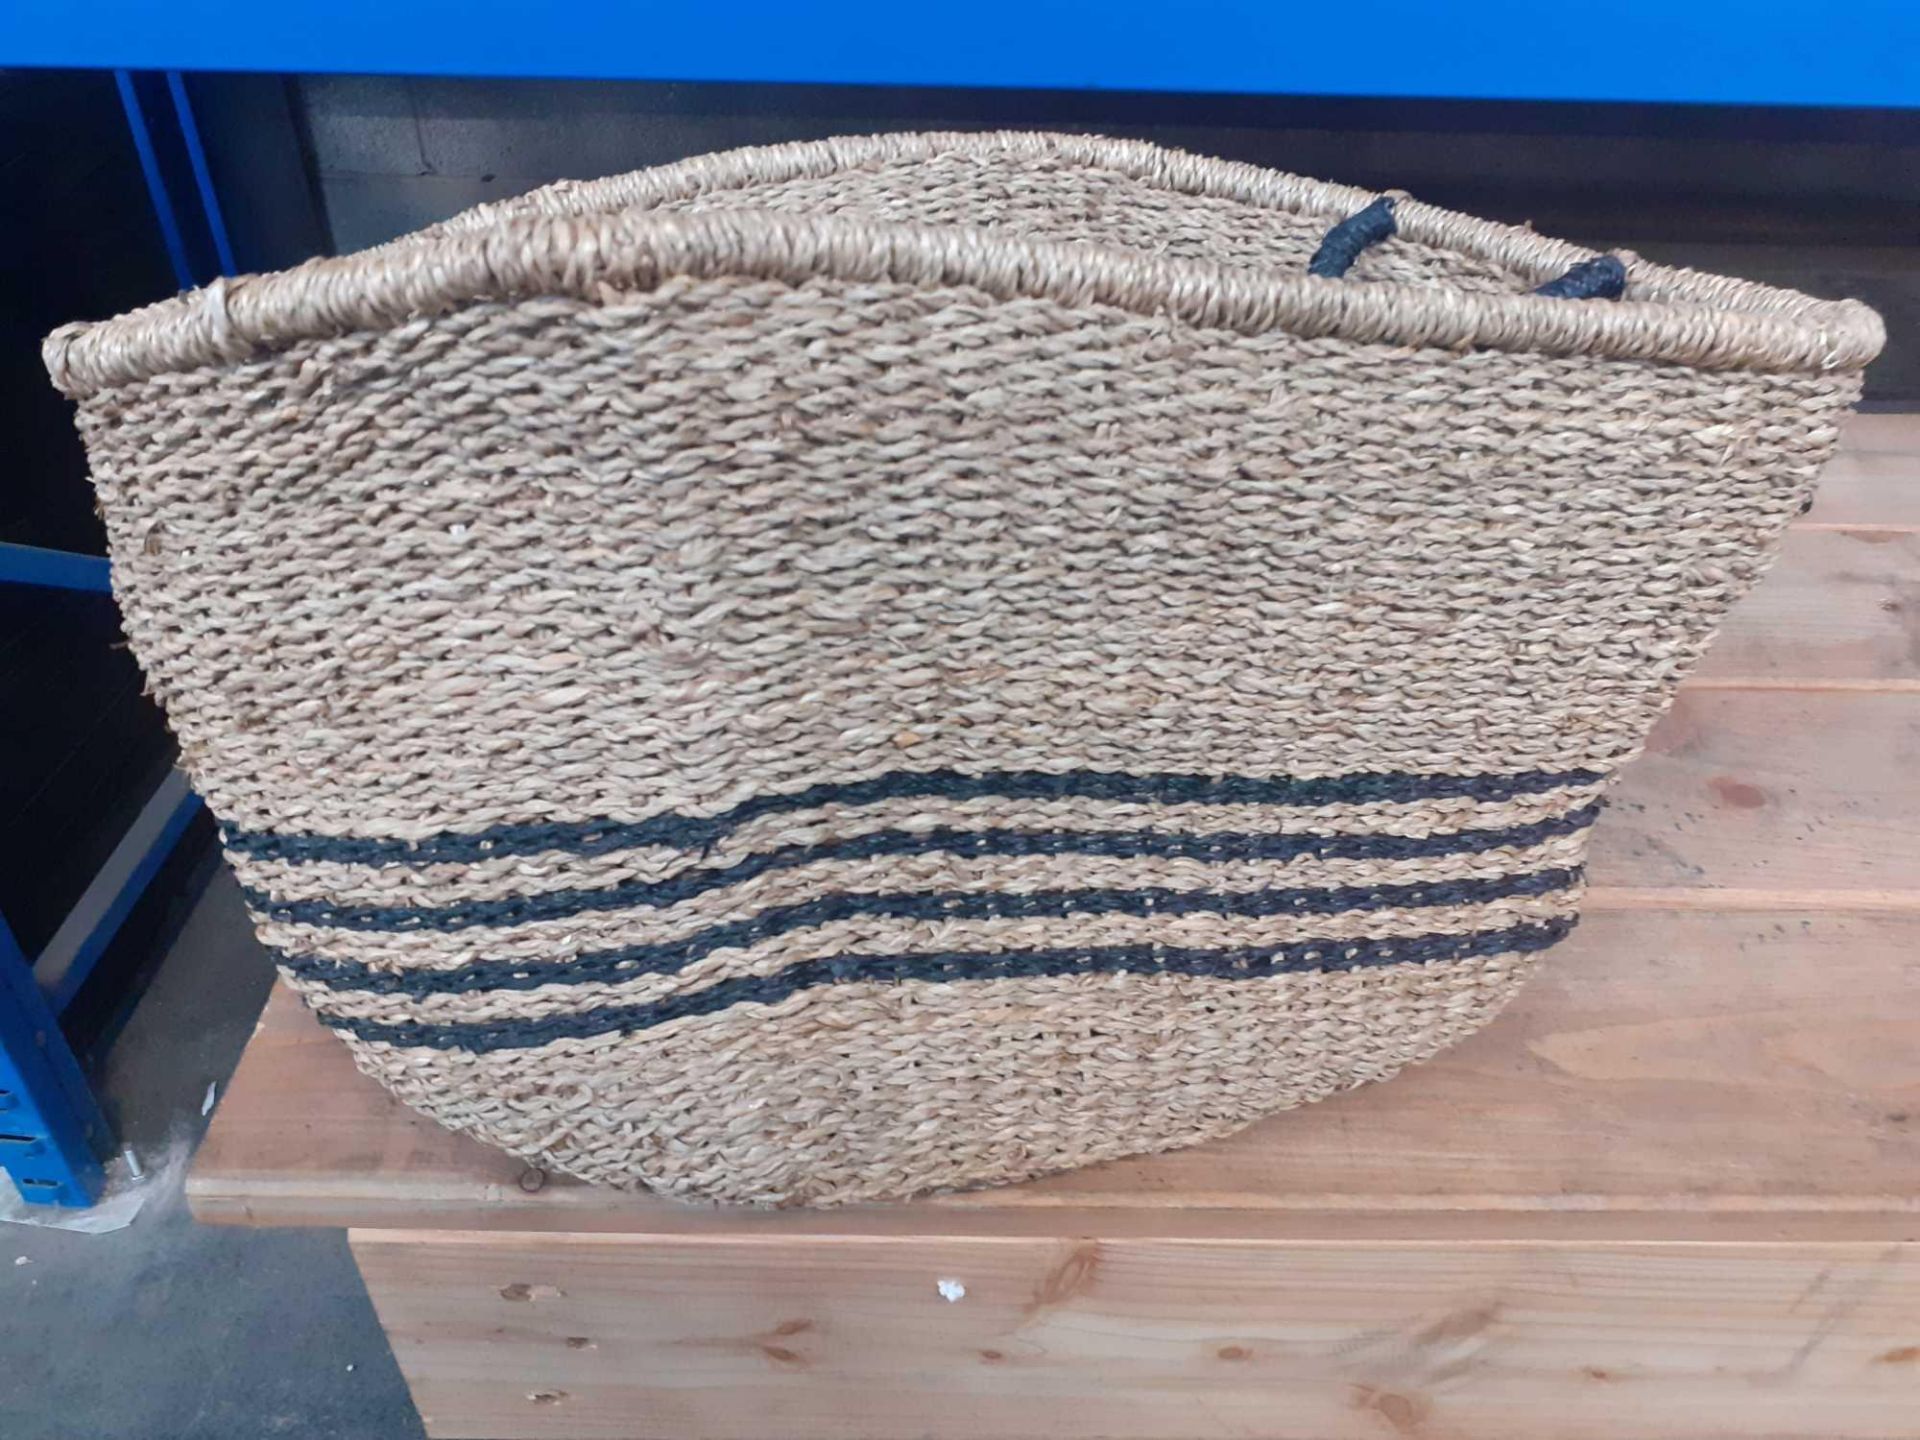 1 LOT TO CONTAIN 1 LA REDOUTE NATURAL BASKET